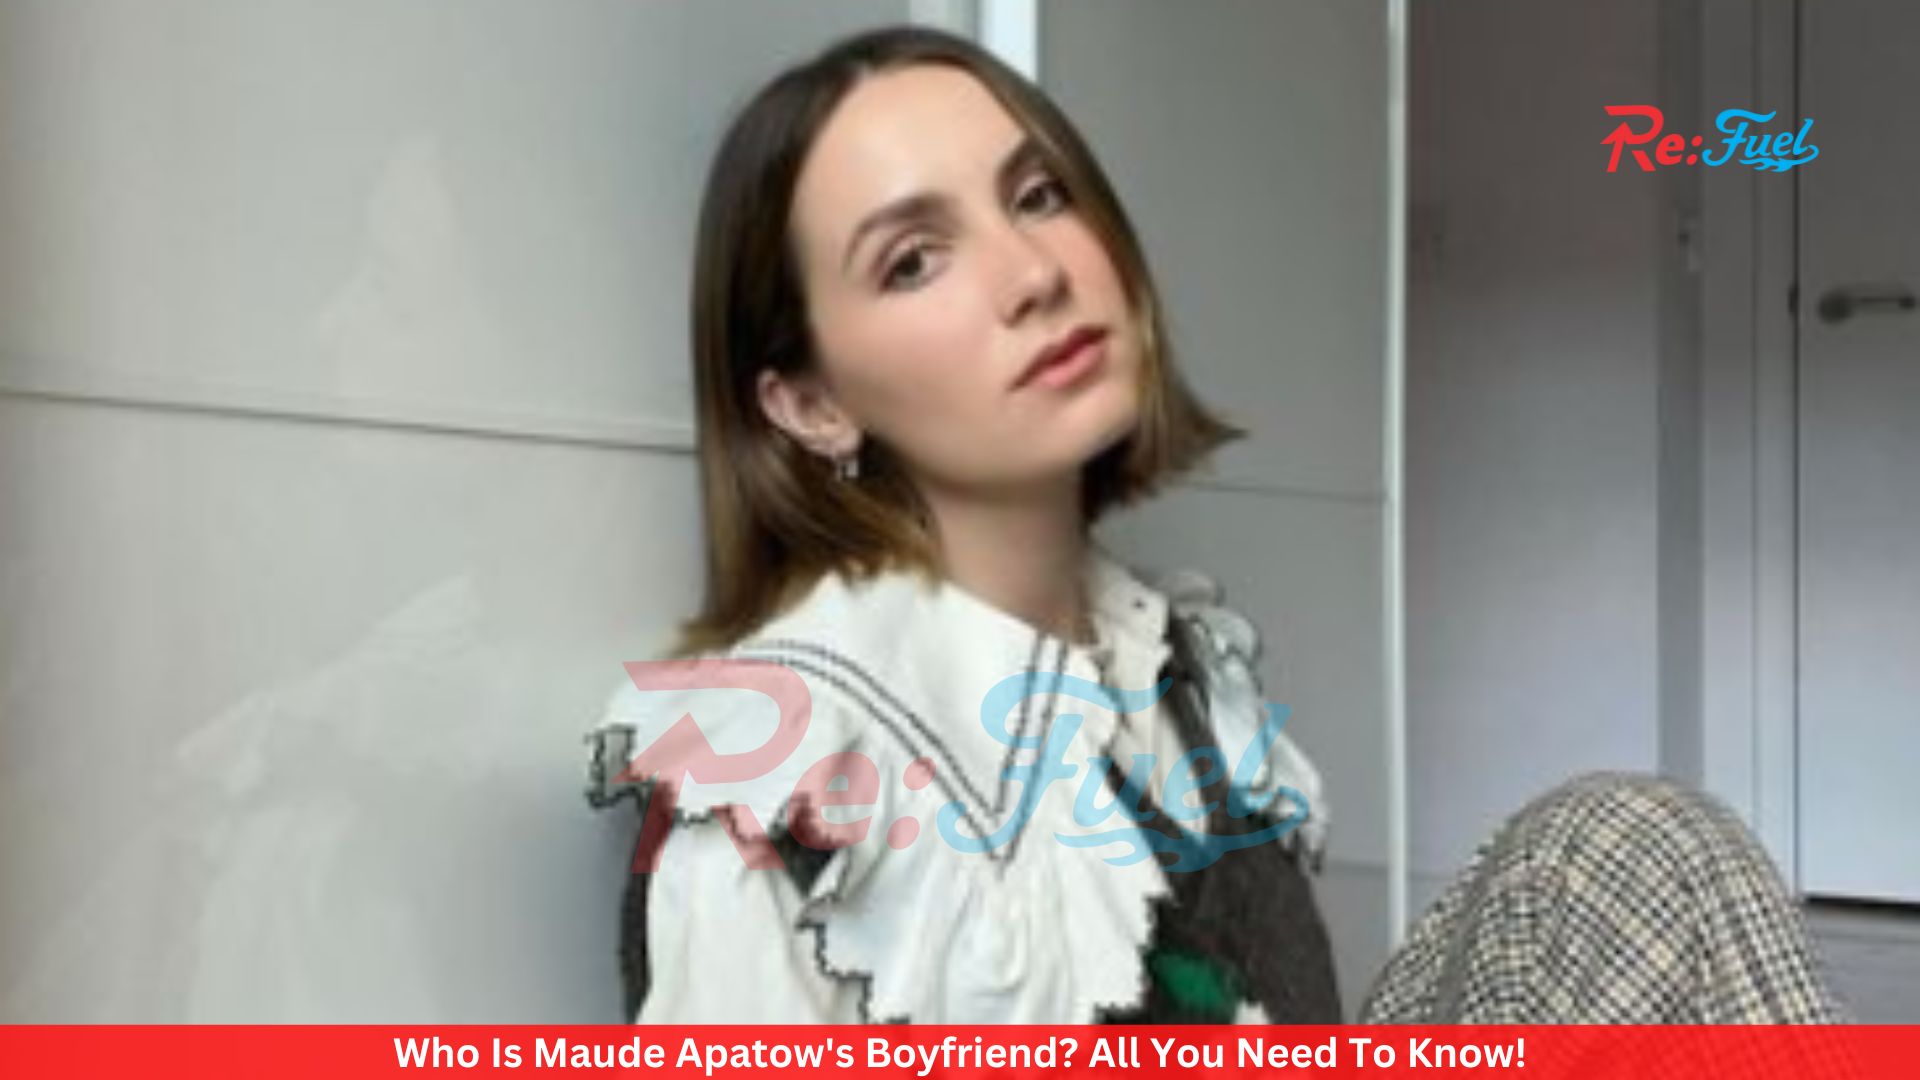 Who Is Maude Apatow's Boyfriend? All You Need To Know!